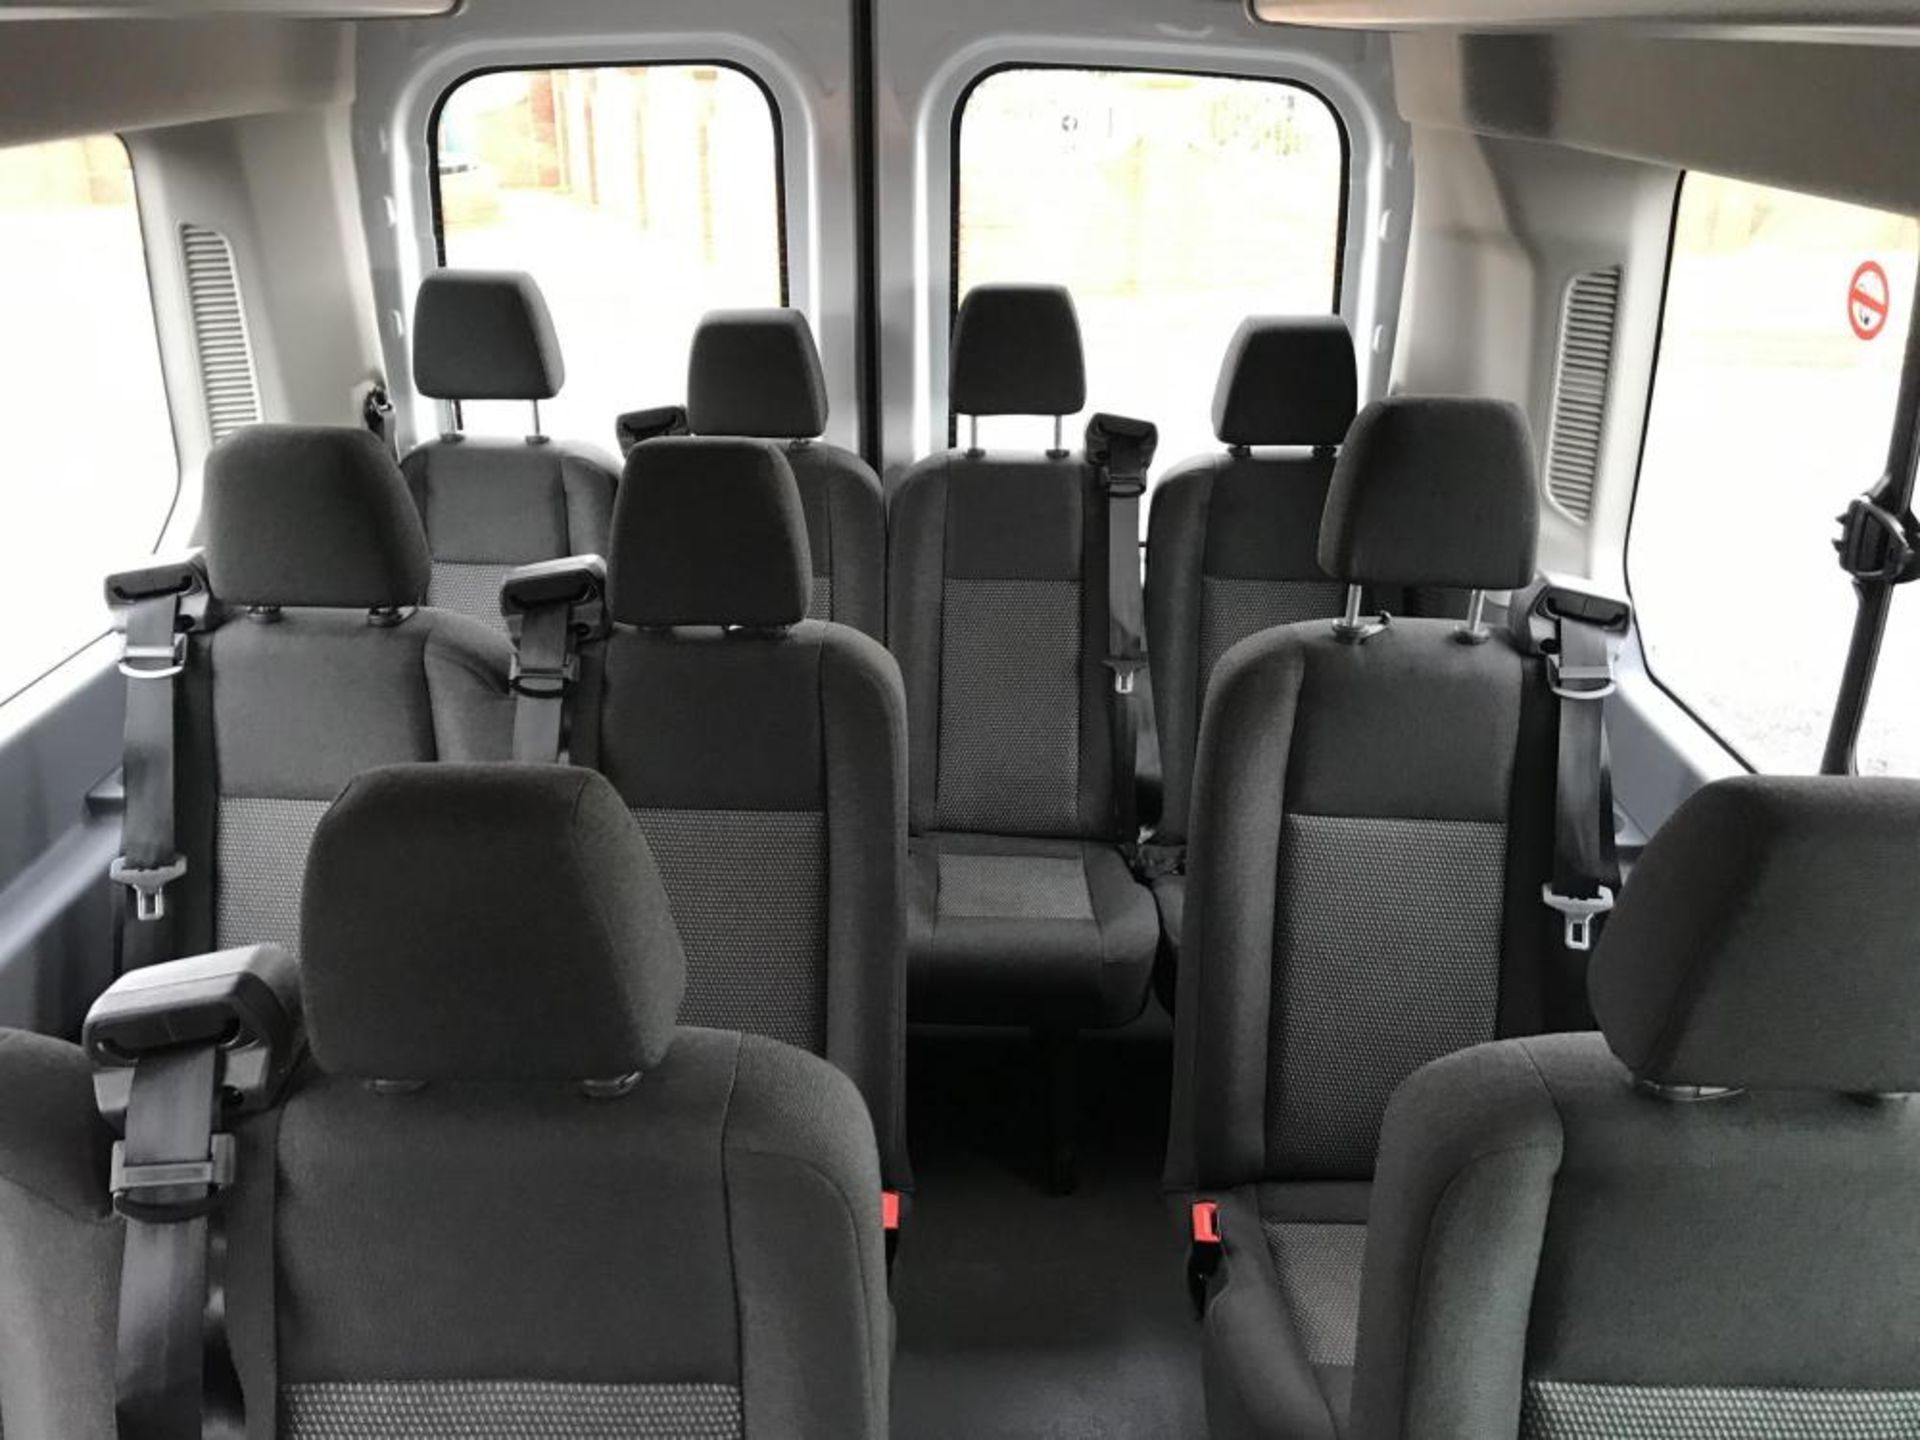 2017/17 REG FORD TRANSIT 460 ECONETIC TECH 2.2 DIESEL WHITE 17 SEAT MINIBUS, SHOWING 0 FORMER KEEPER - Image 10 of 17